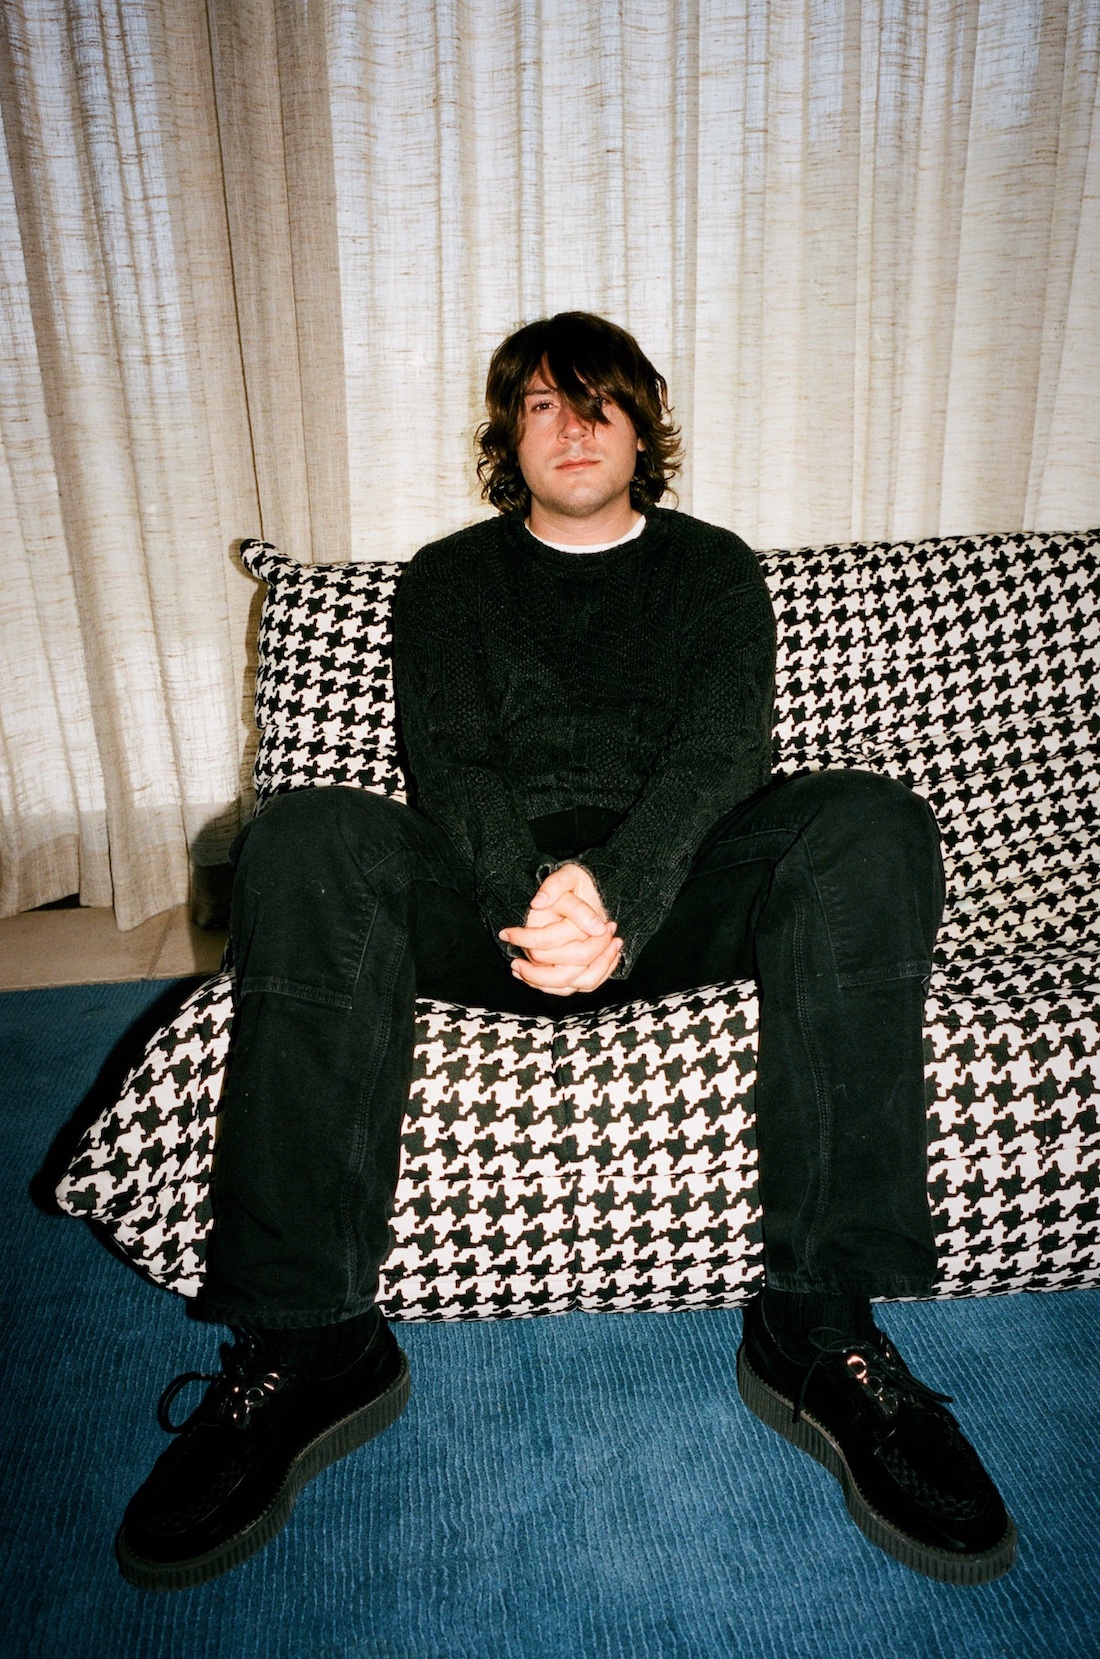 Indio Downey Celebrates 18 Months of Sobriety and His Upcoming EP  (Exclusive)